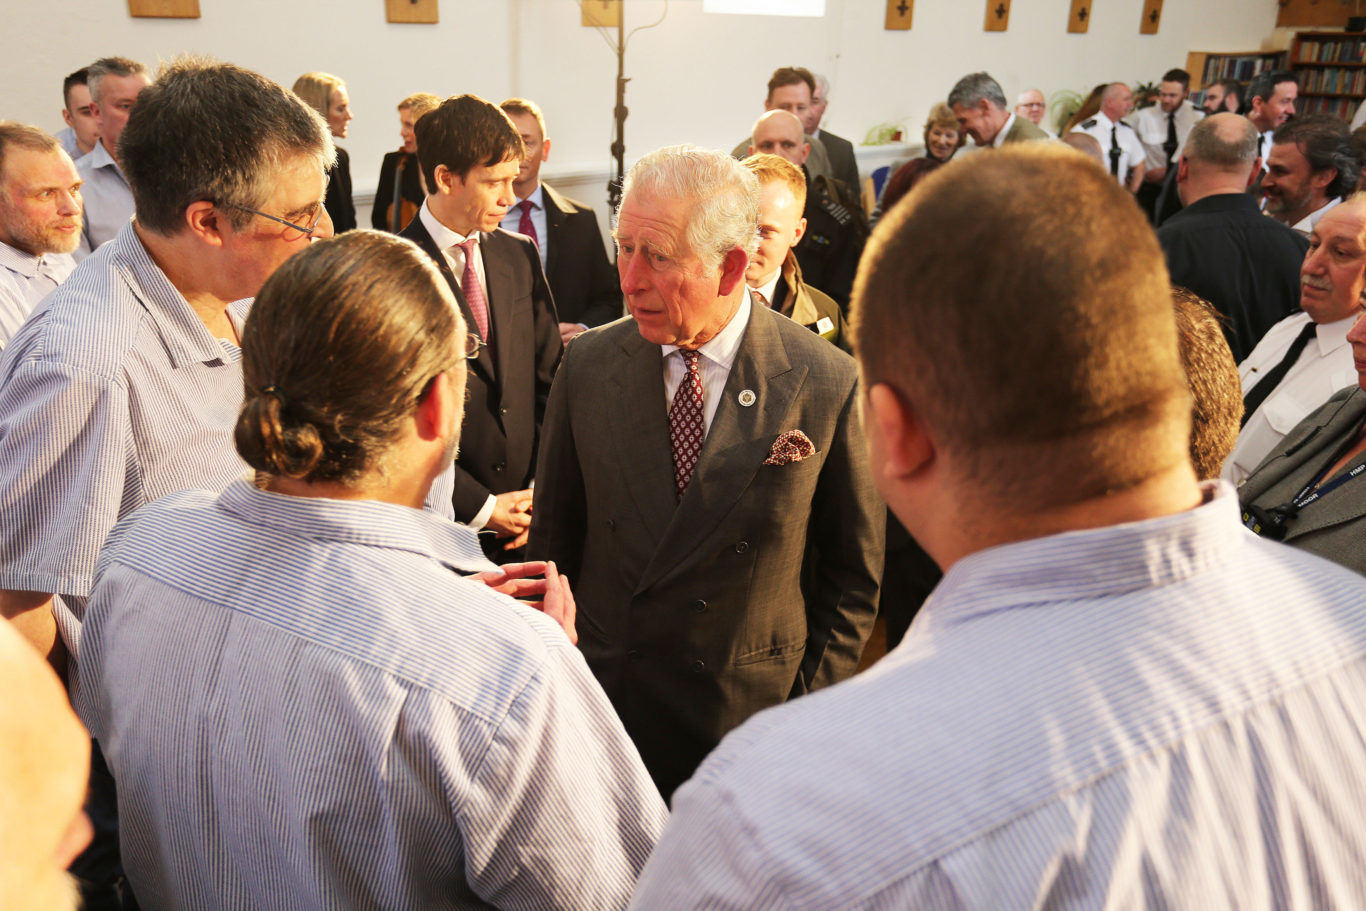 The Prince of Wales meets members of the prison choir (Marc Giddings/The Sun/PA)